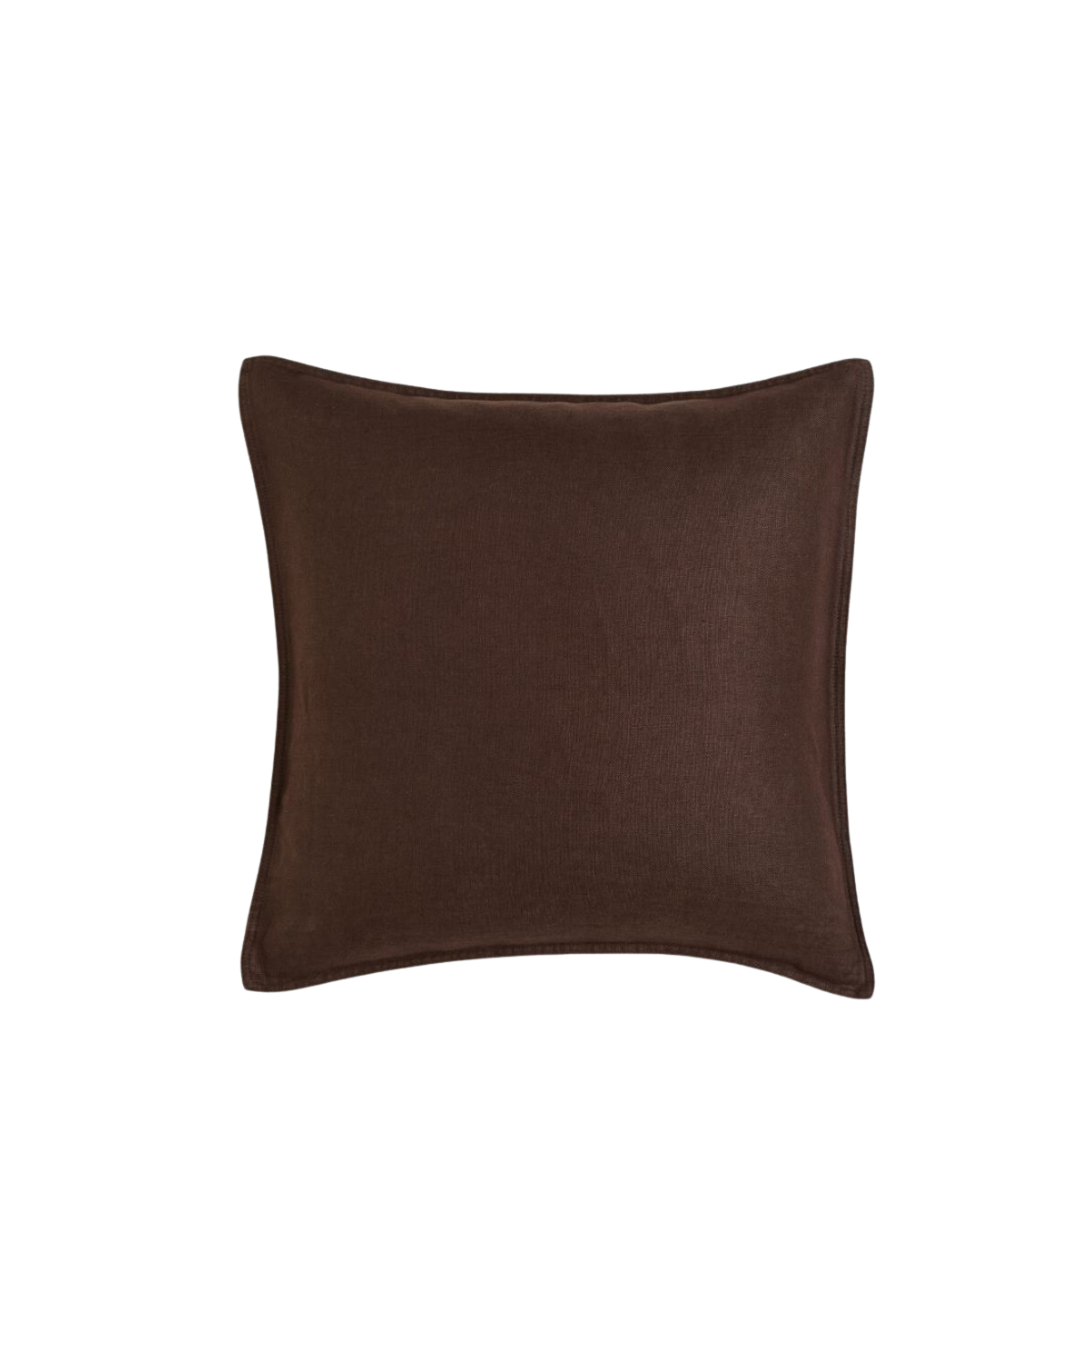 Washed Linen Cushion Cover - Dark Chocolate Brown